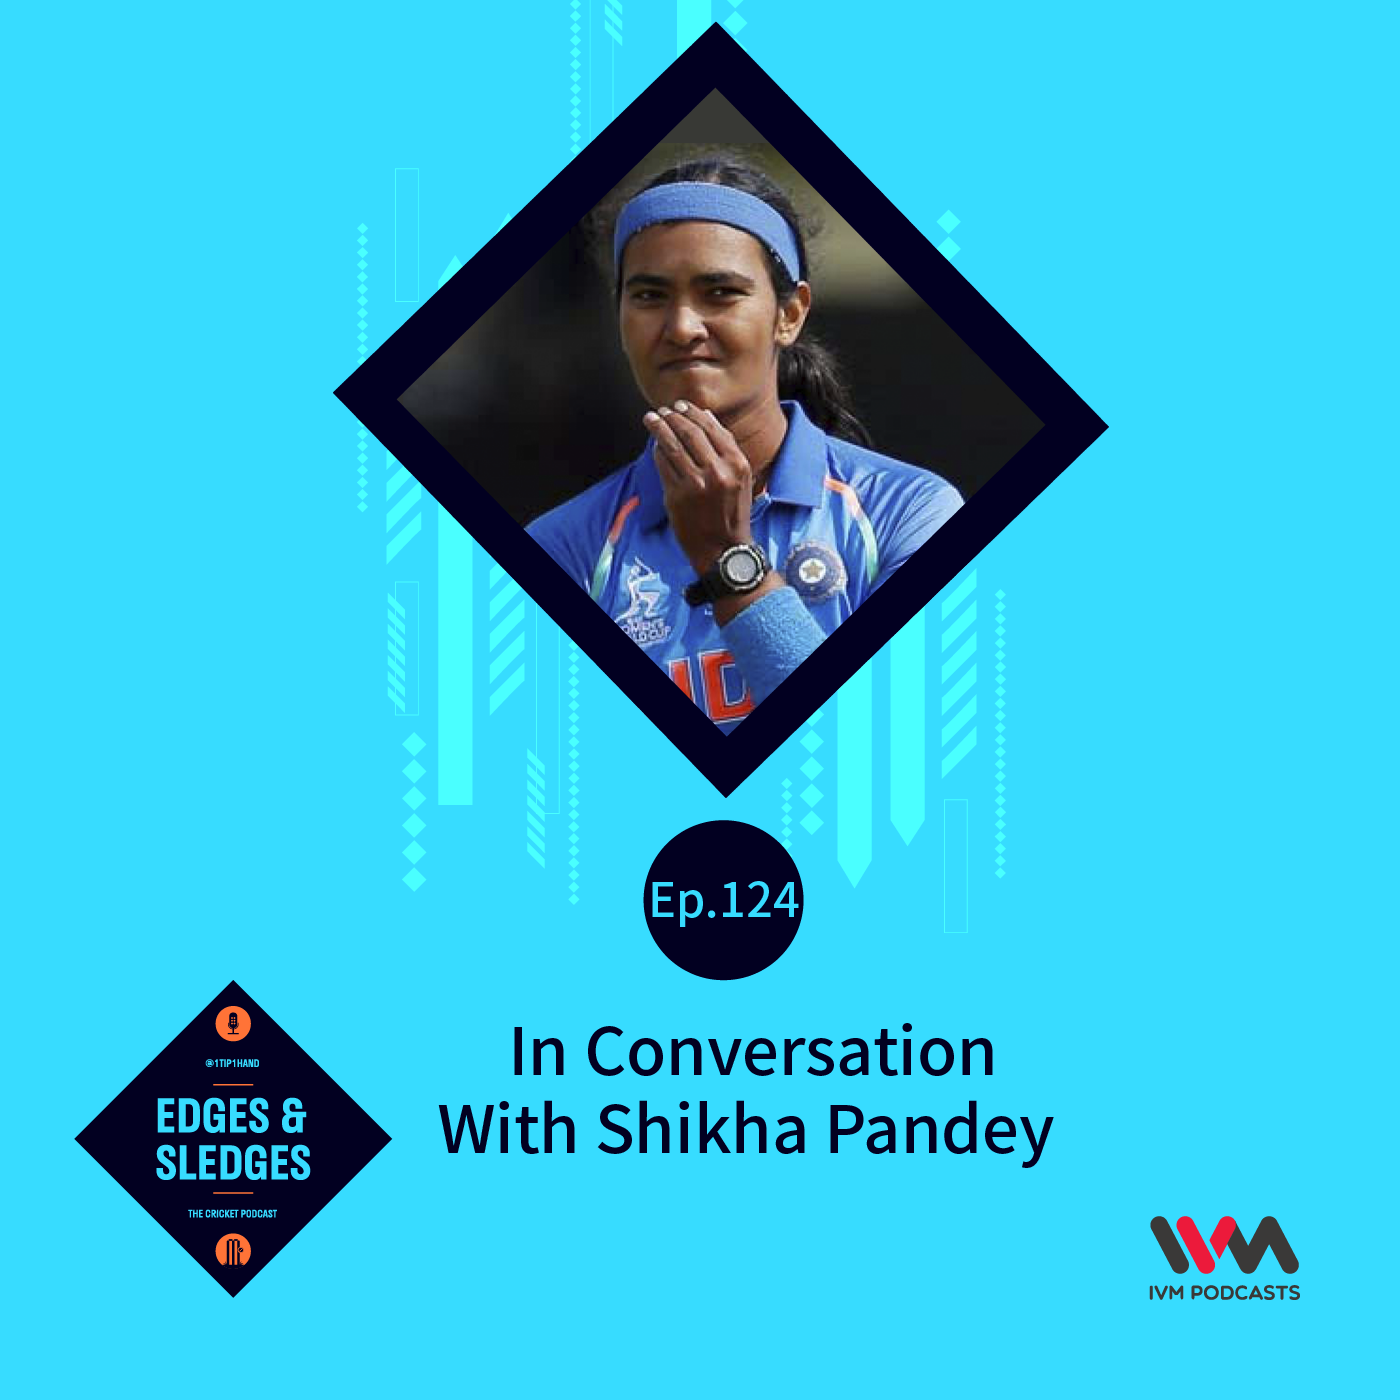 In Conversation With Shikha Pandey